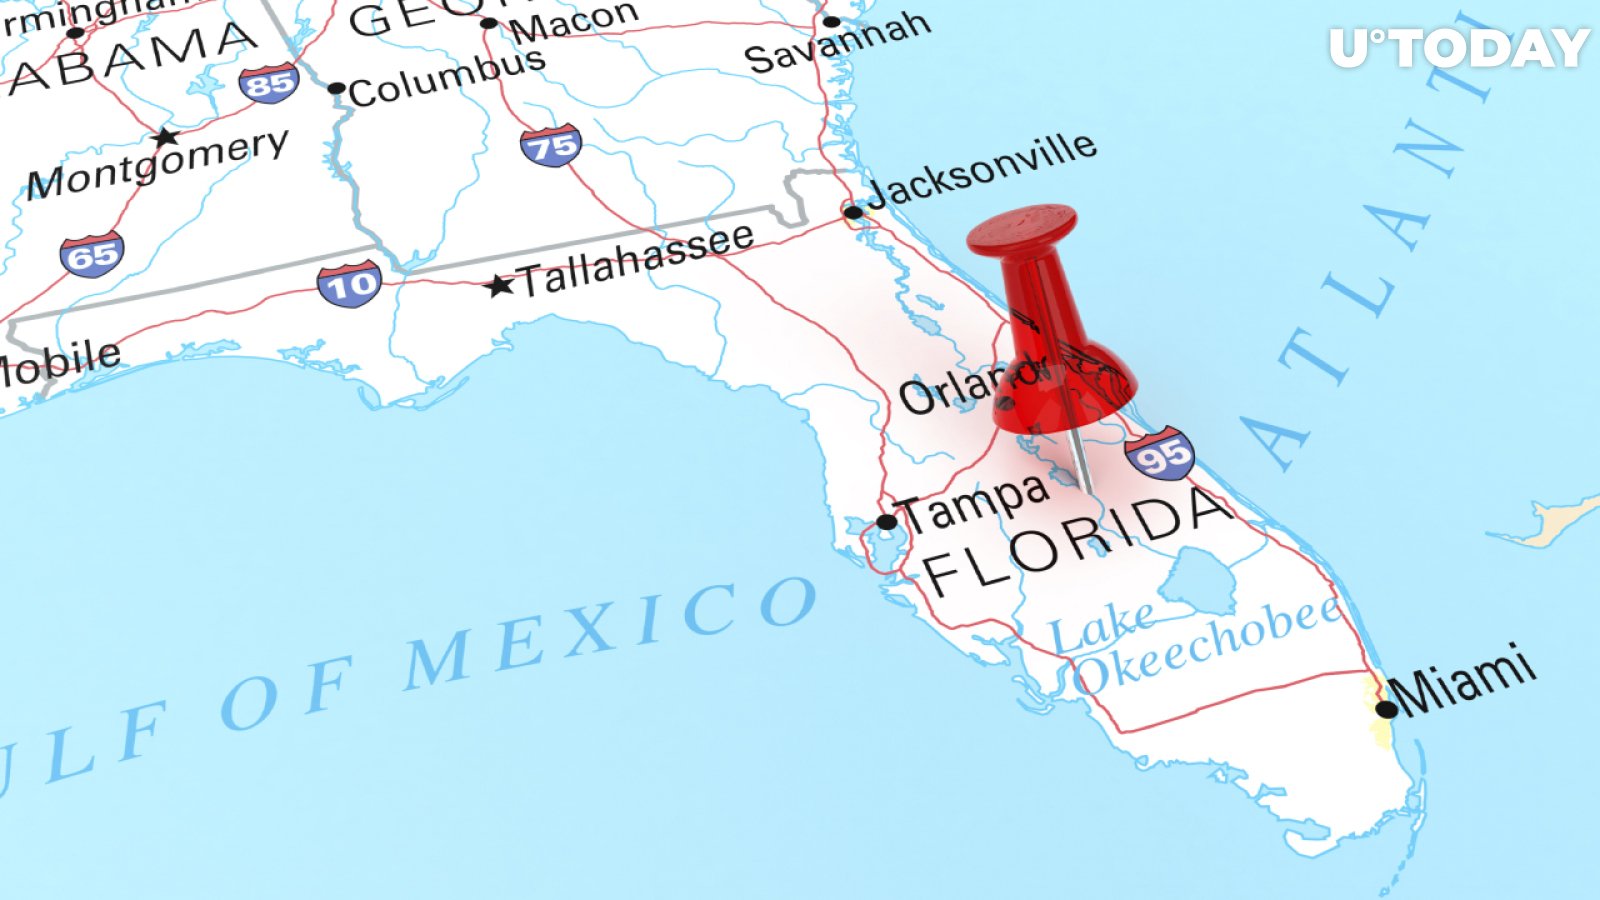 Florida to Pilot Blockchain for Medicaid Payments